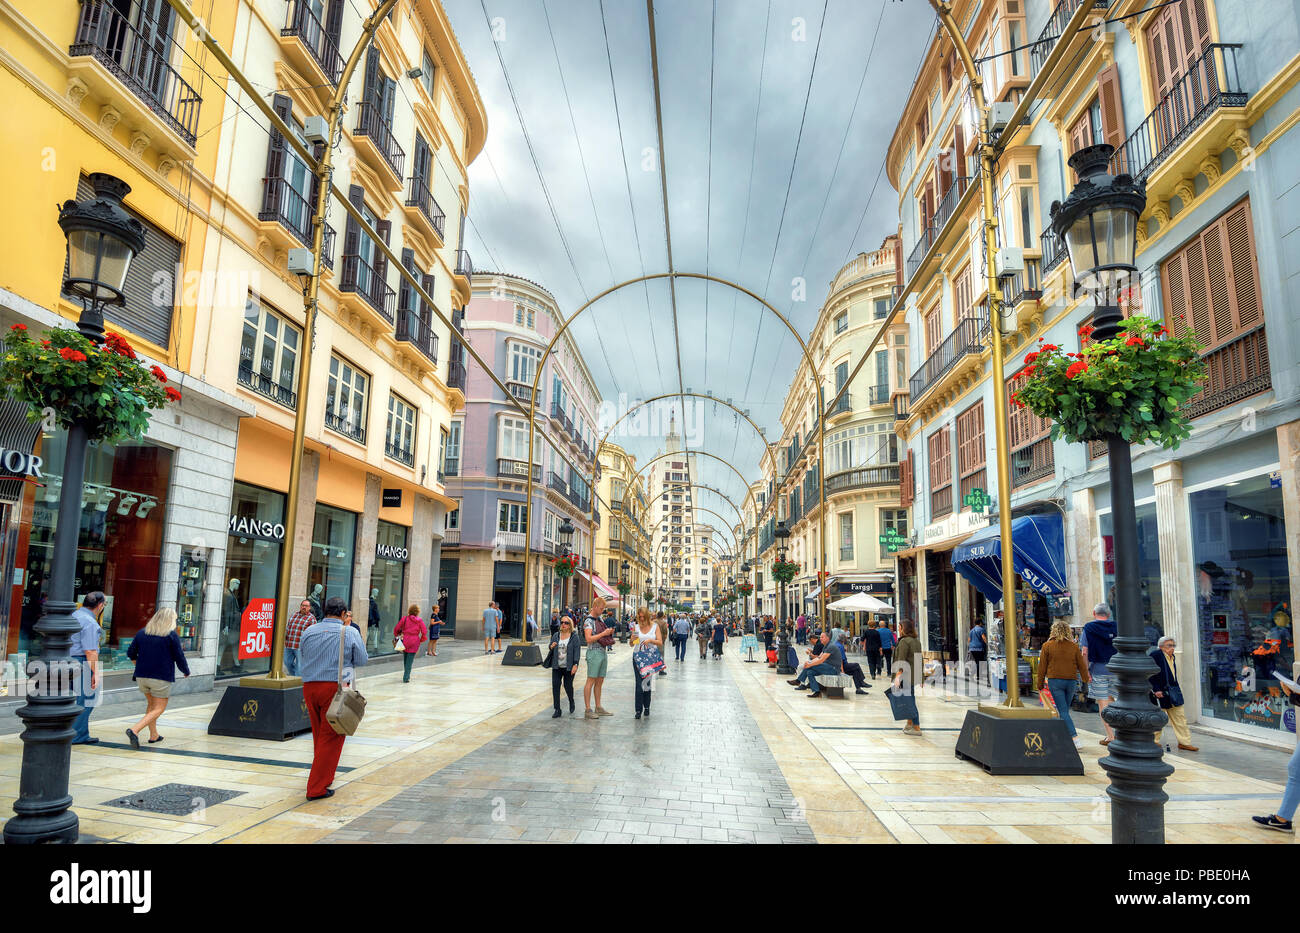 View of Marques de Larios main street with shops, cafe and walking people in commercial town centre. Malaga, Spain Stock Photo